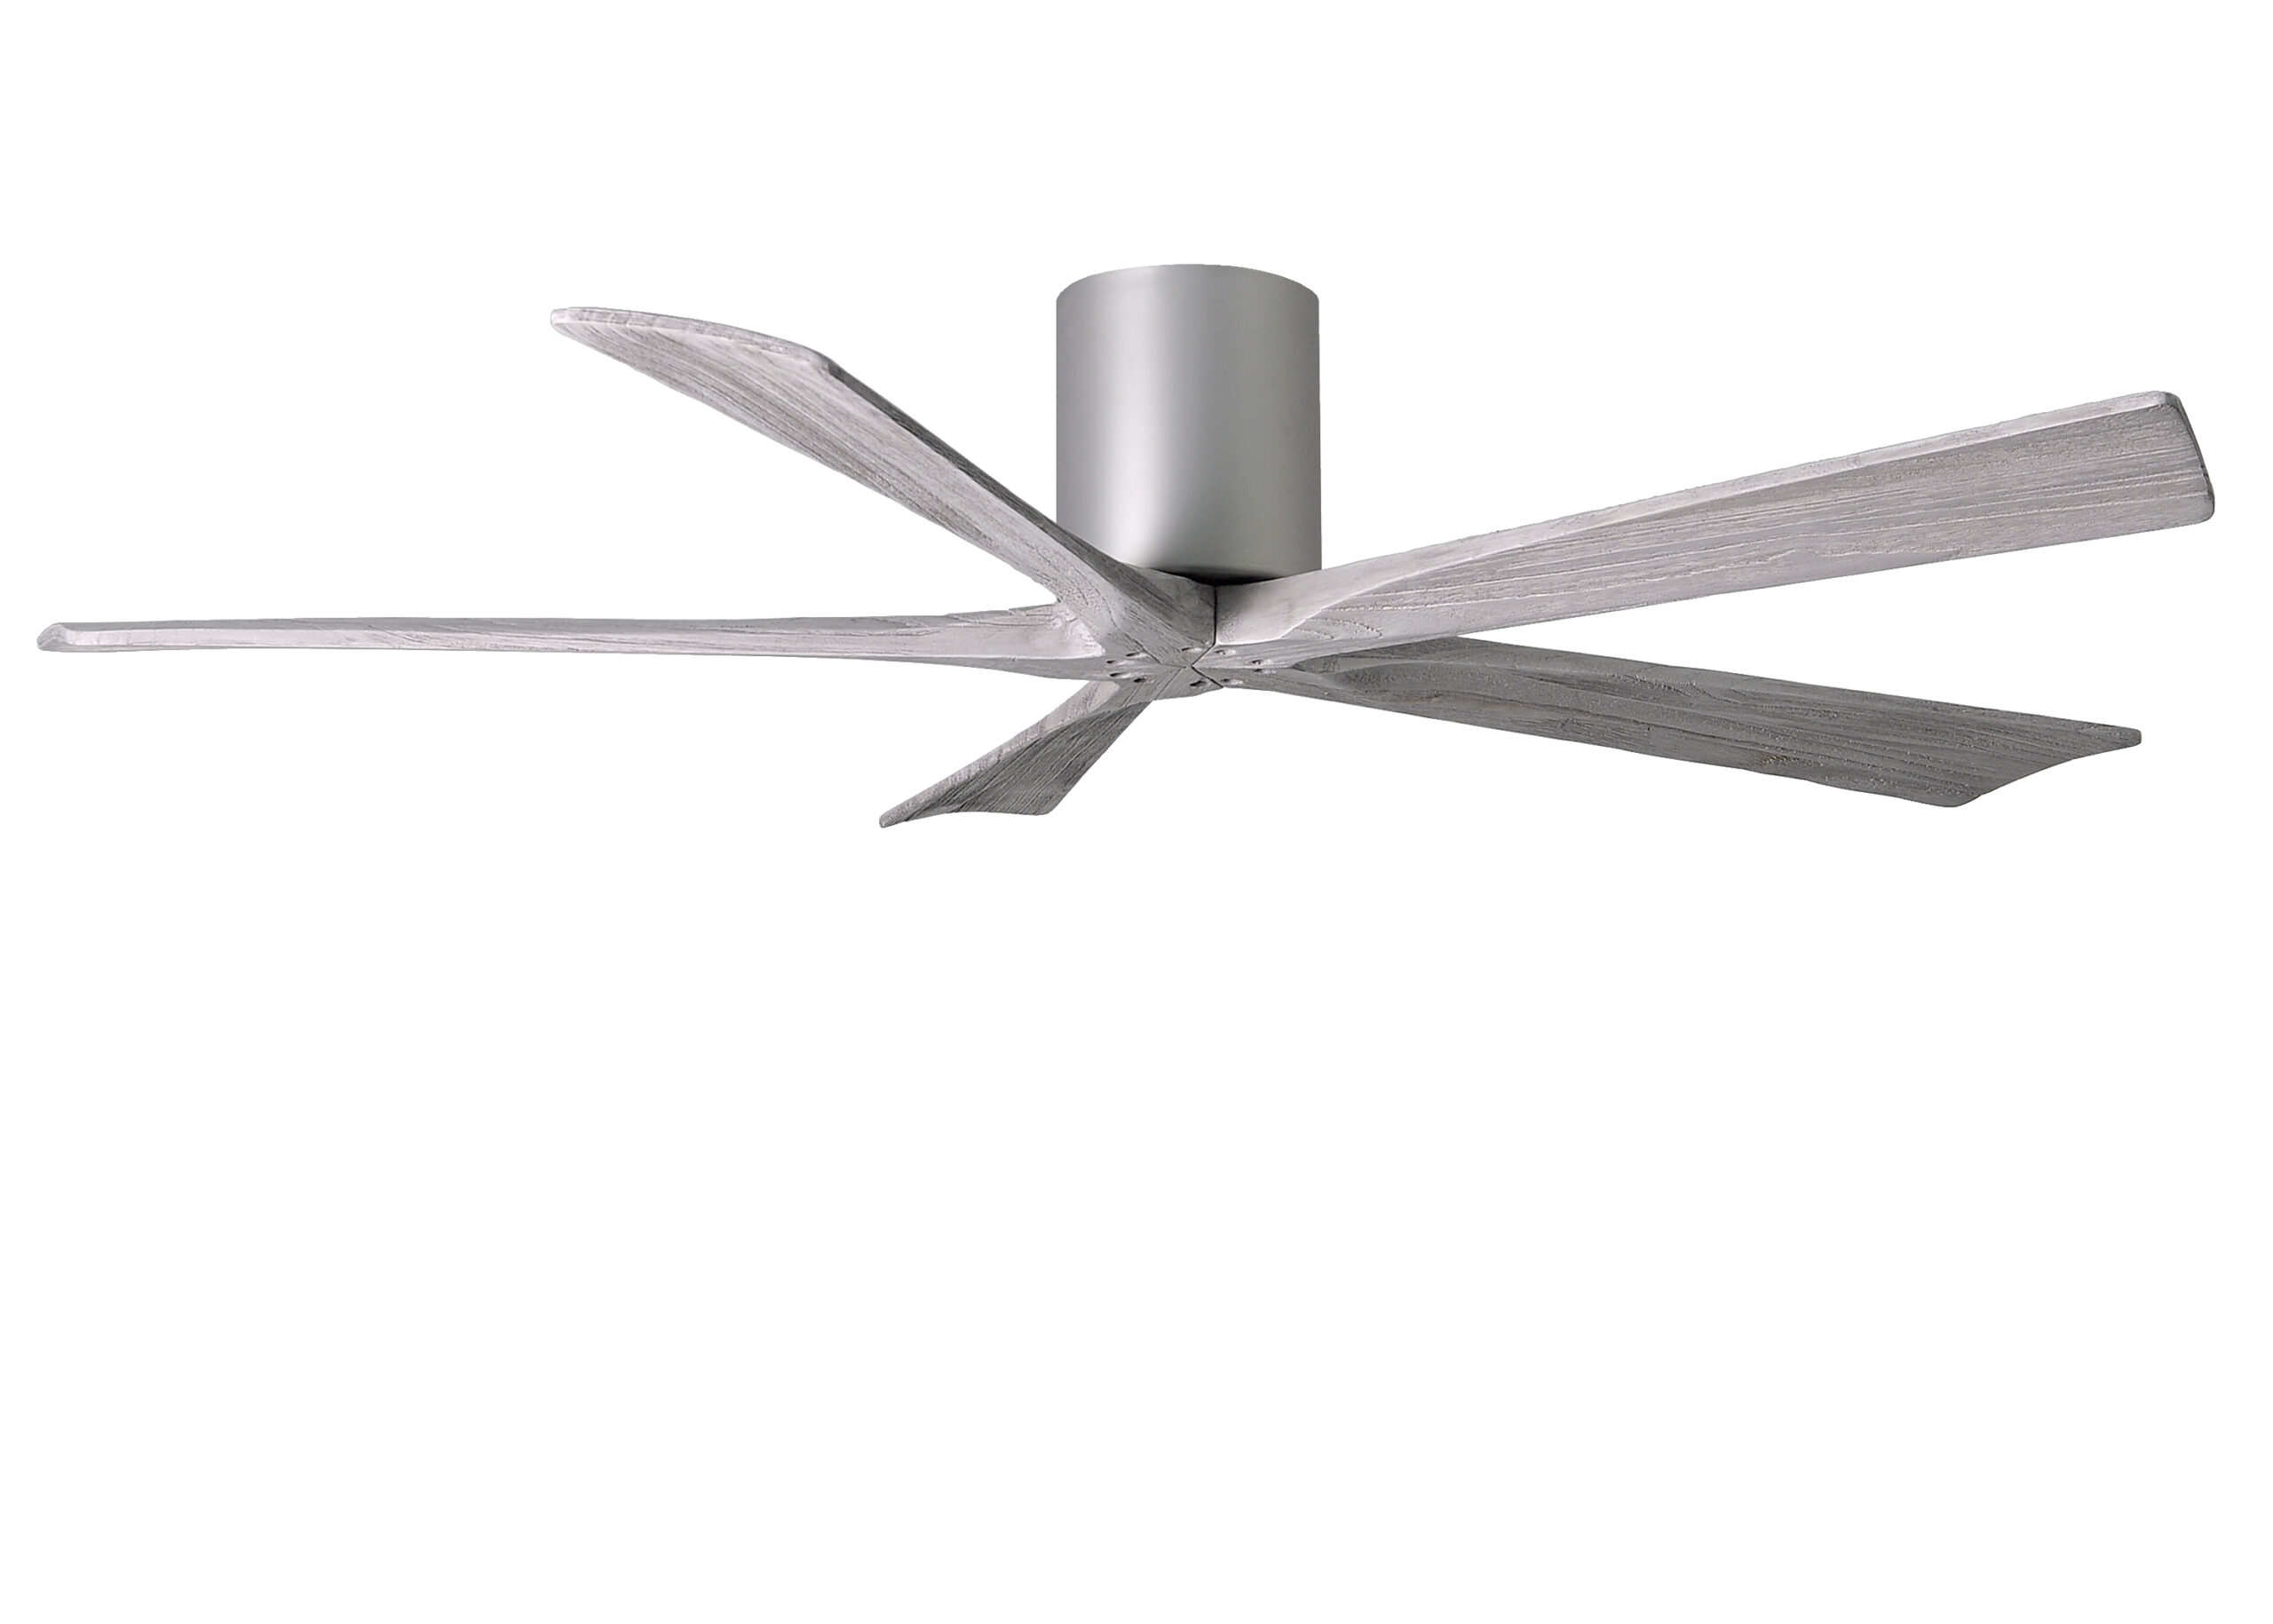 Irene-5H Ceiling Fan in Brushed Nickel Finish with 60